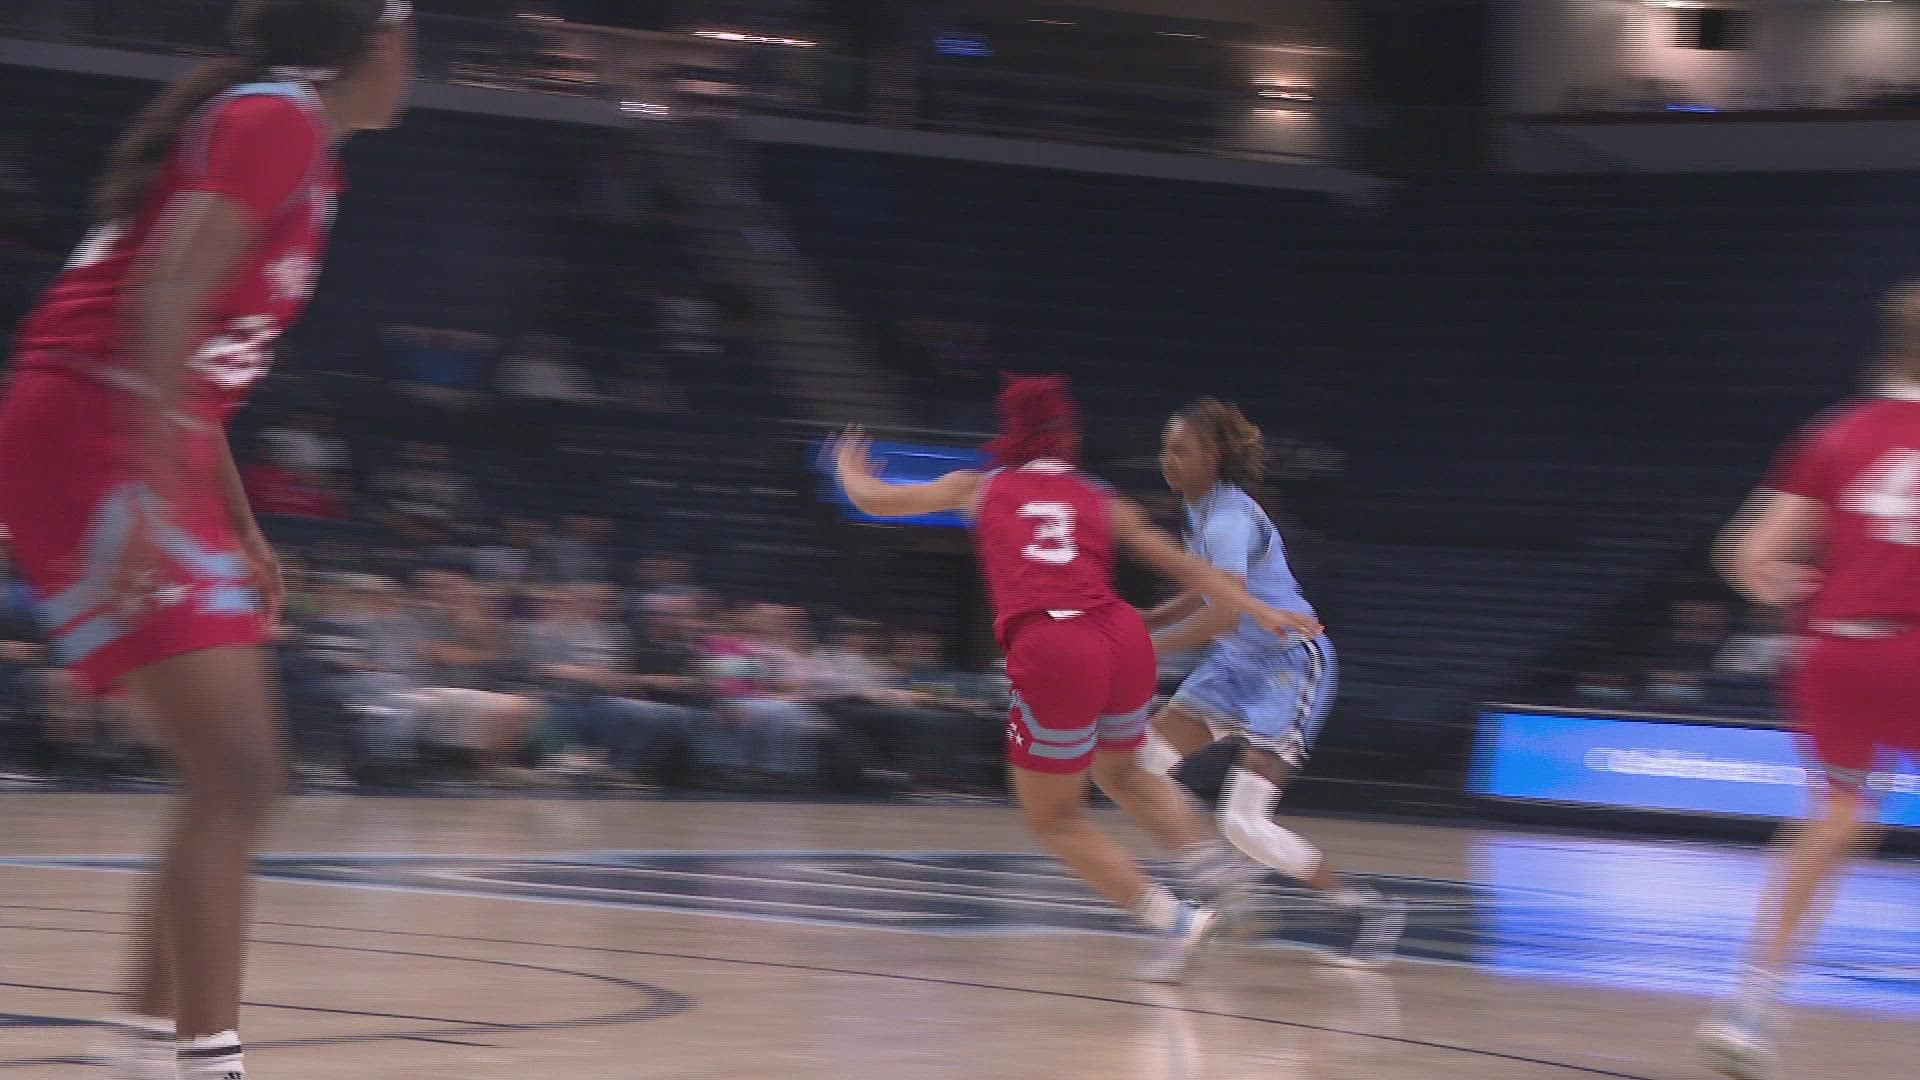 Game winner came with 10 seconds to go in 65-62 Lady Techsters win.